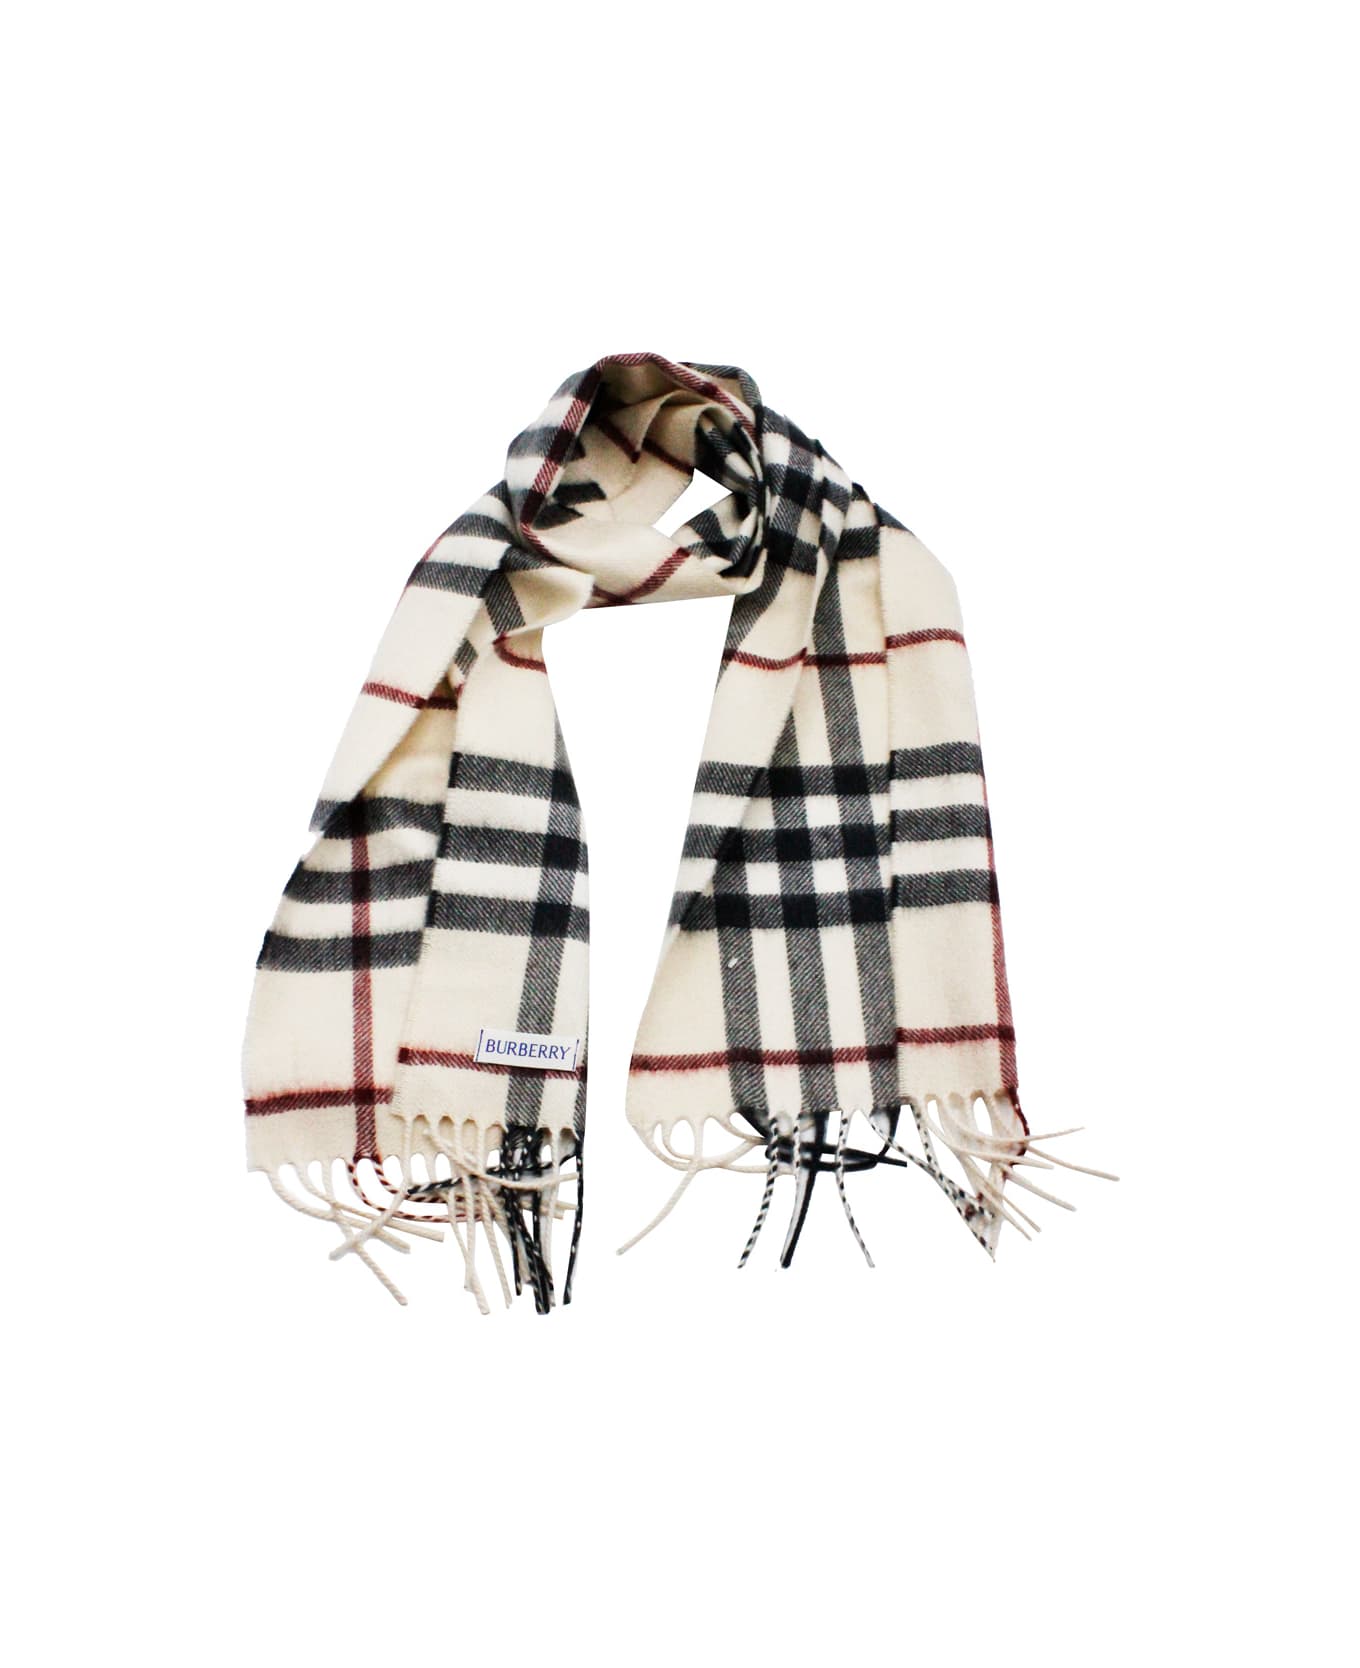 Burberry Scarf In Pure And Soft Cashmere With Check Pattern And Fringes At The Hem Measuring 130 X 20 - Stone